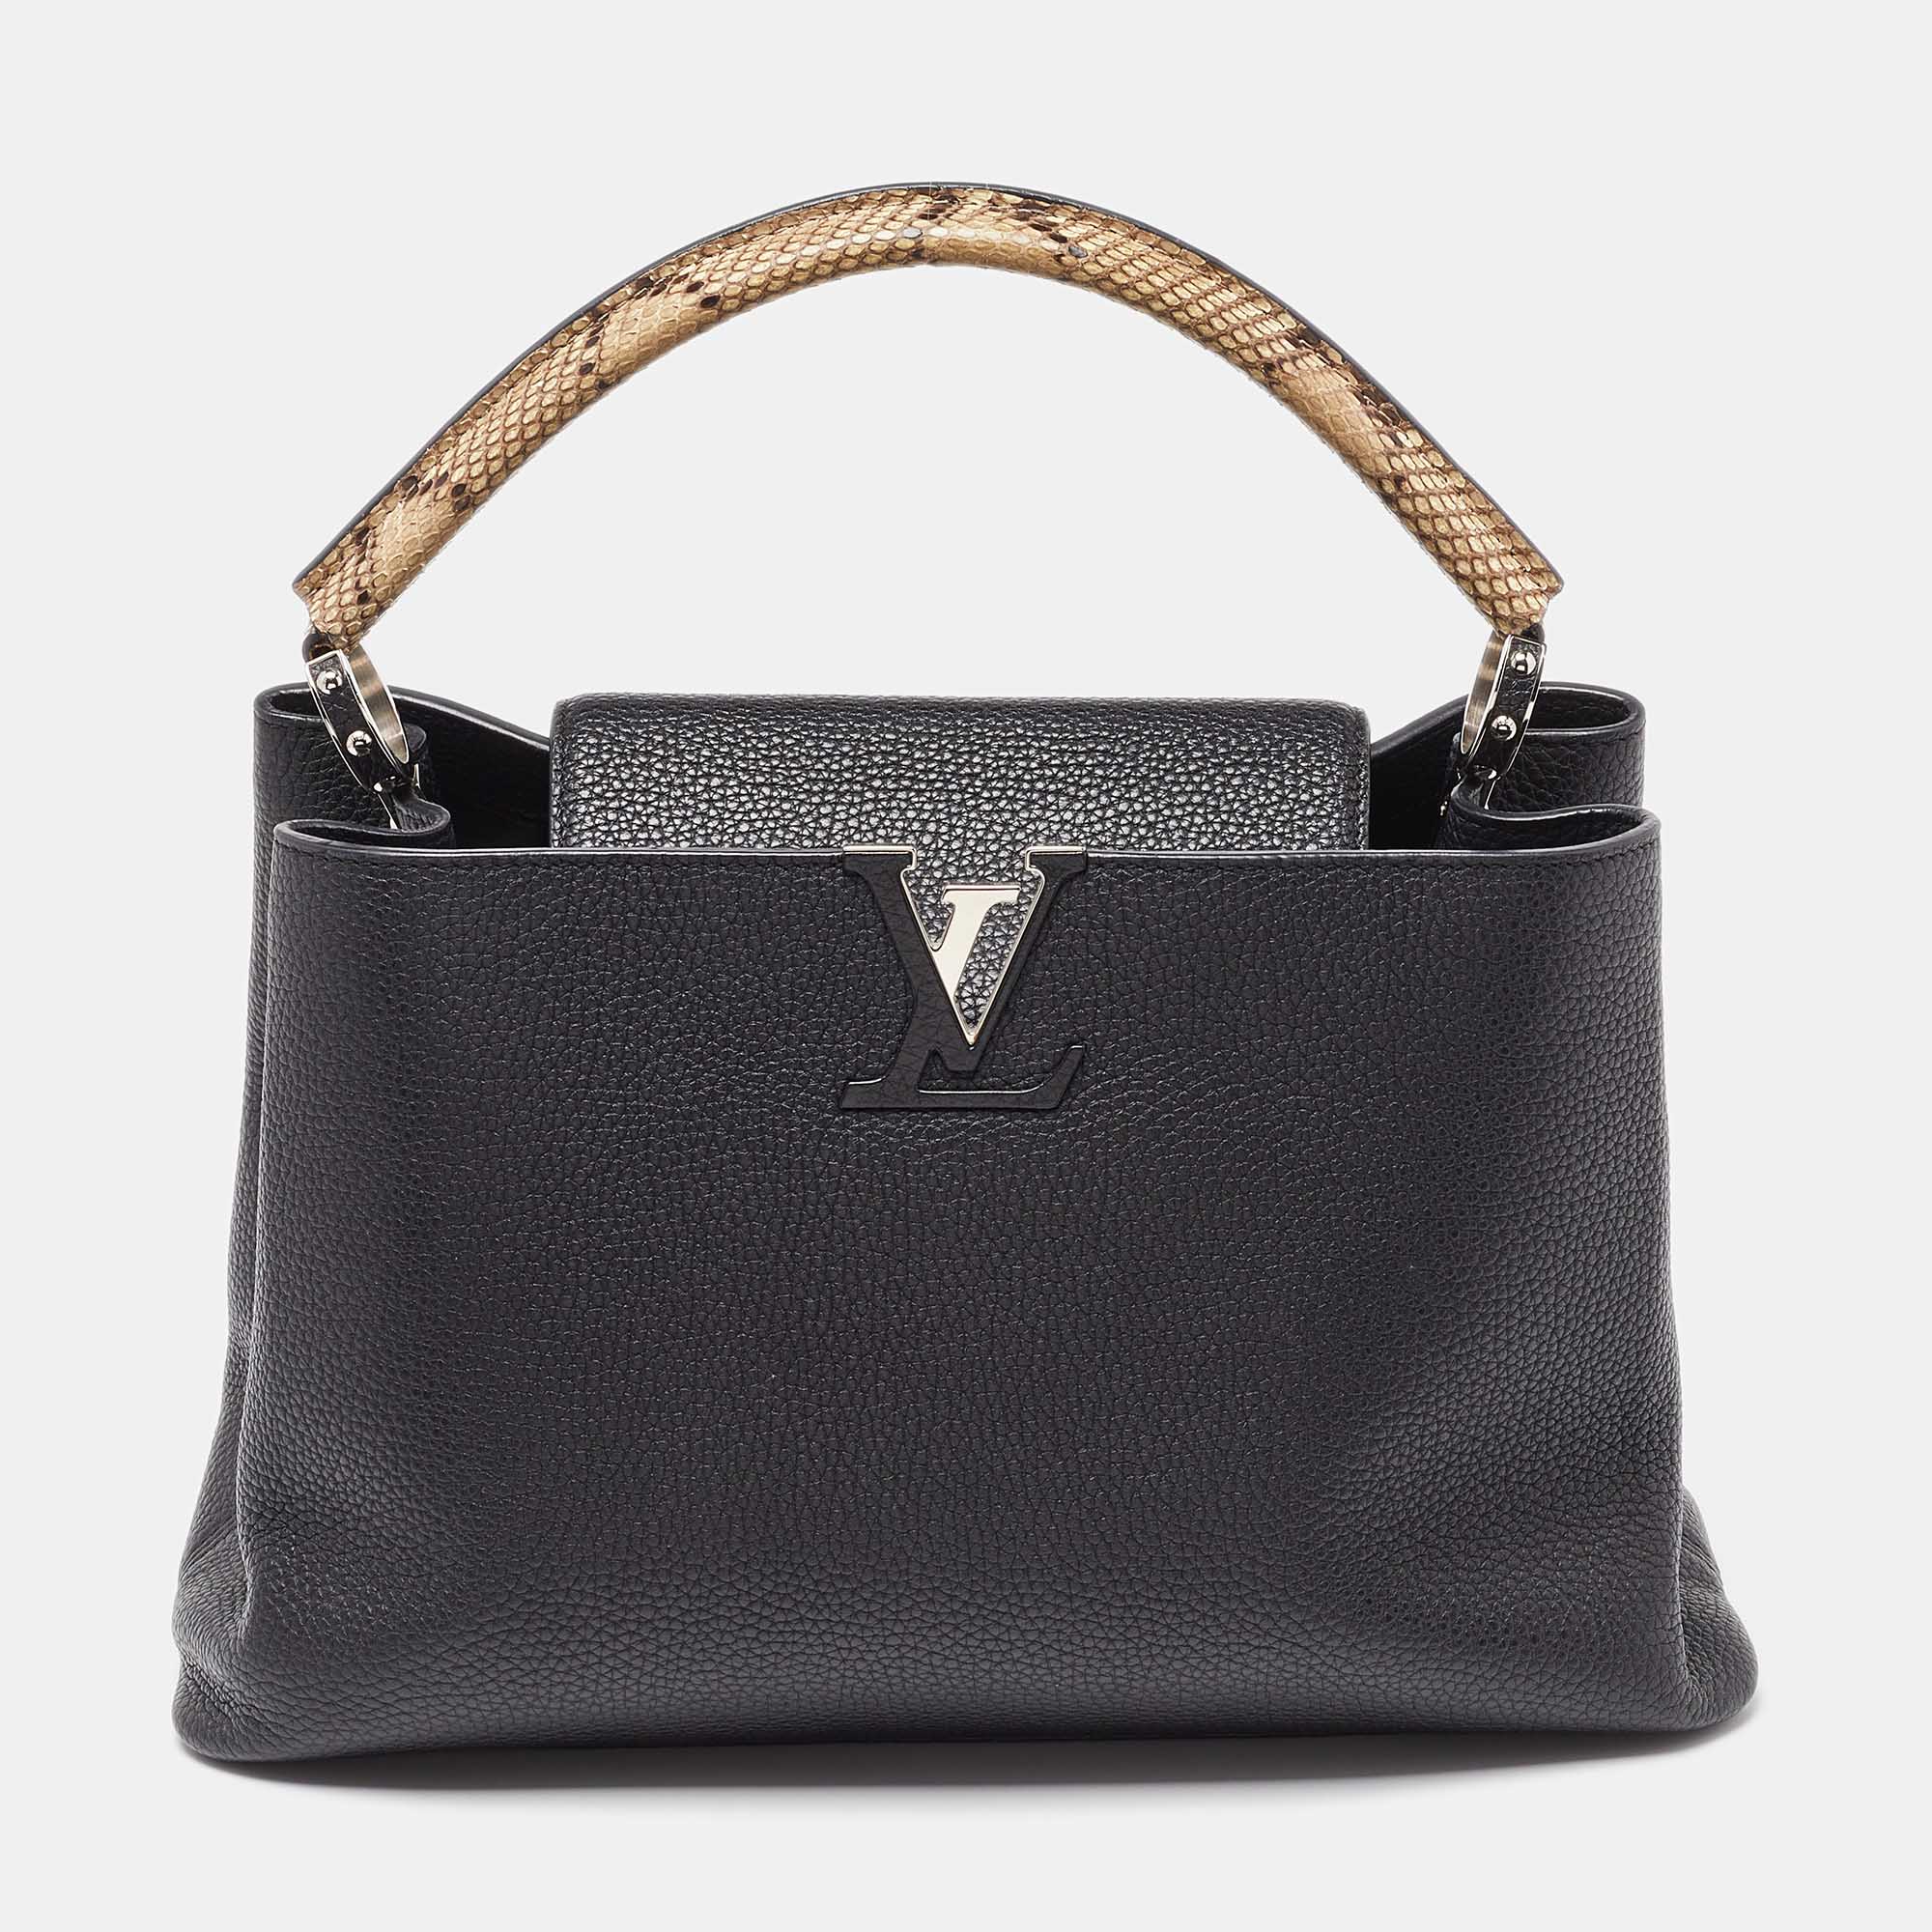 Pre-owned Louis Vuitton Black Leather Capucines Mm Bag